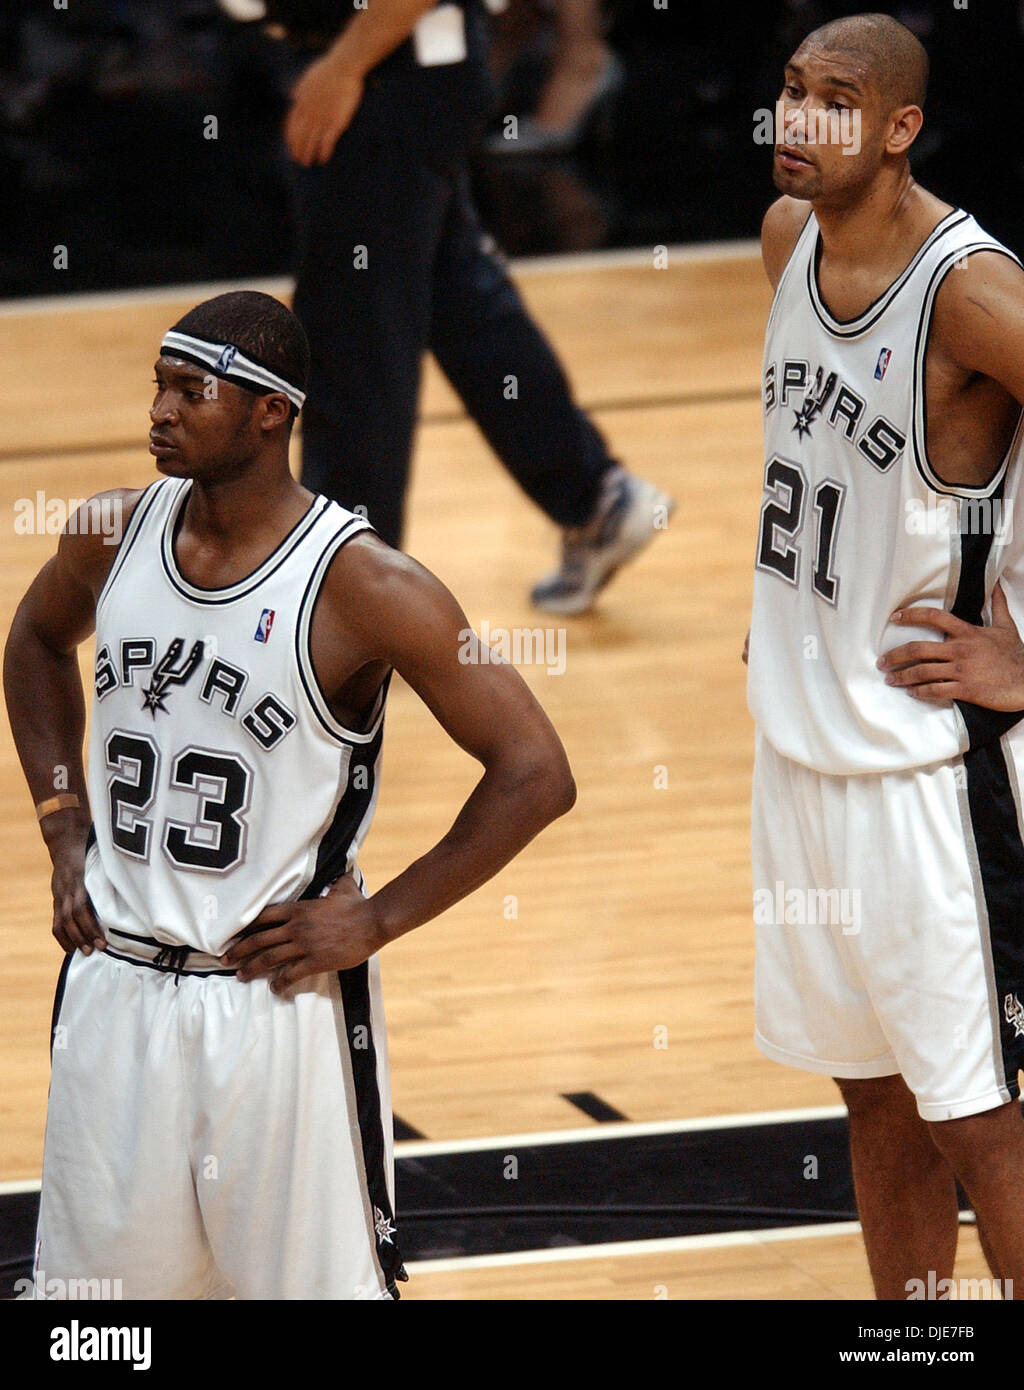 May 13, 2004; San Antonio, TX, USA; Spurs DEVIN BROWN and TIM DUNCAN wait  for the ruling on the final shot during fourth quarter of the Spurs against  the Los Angeles Lakers